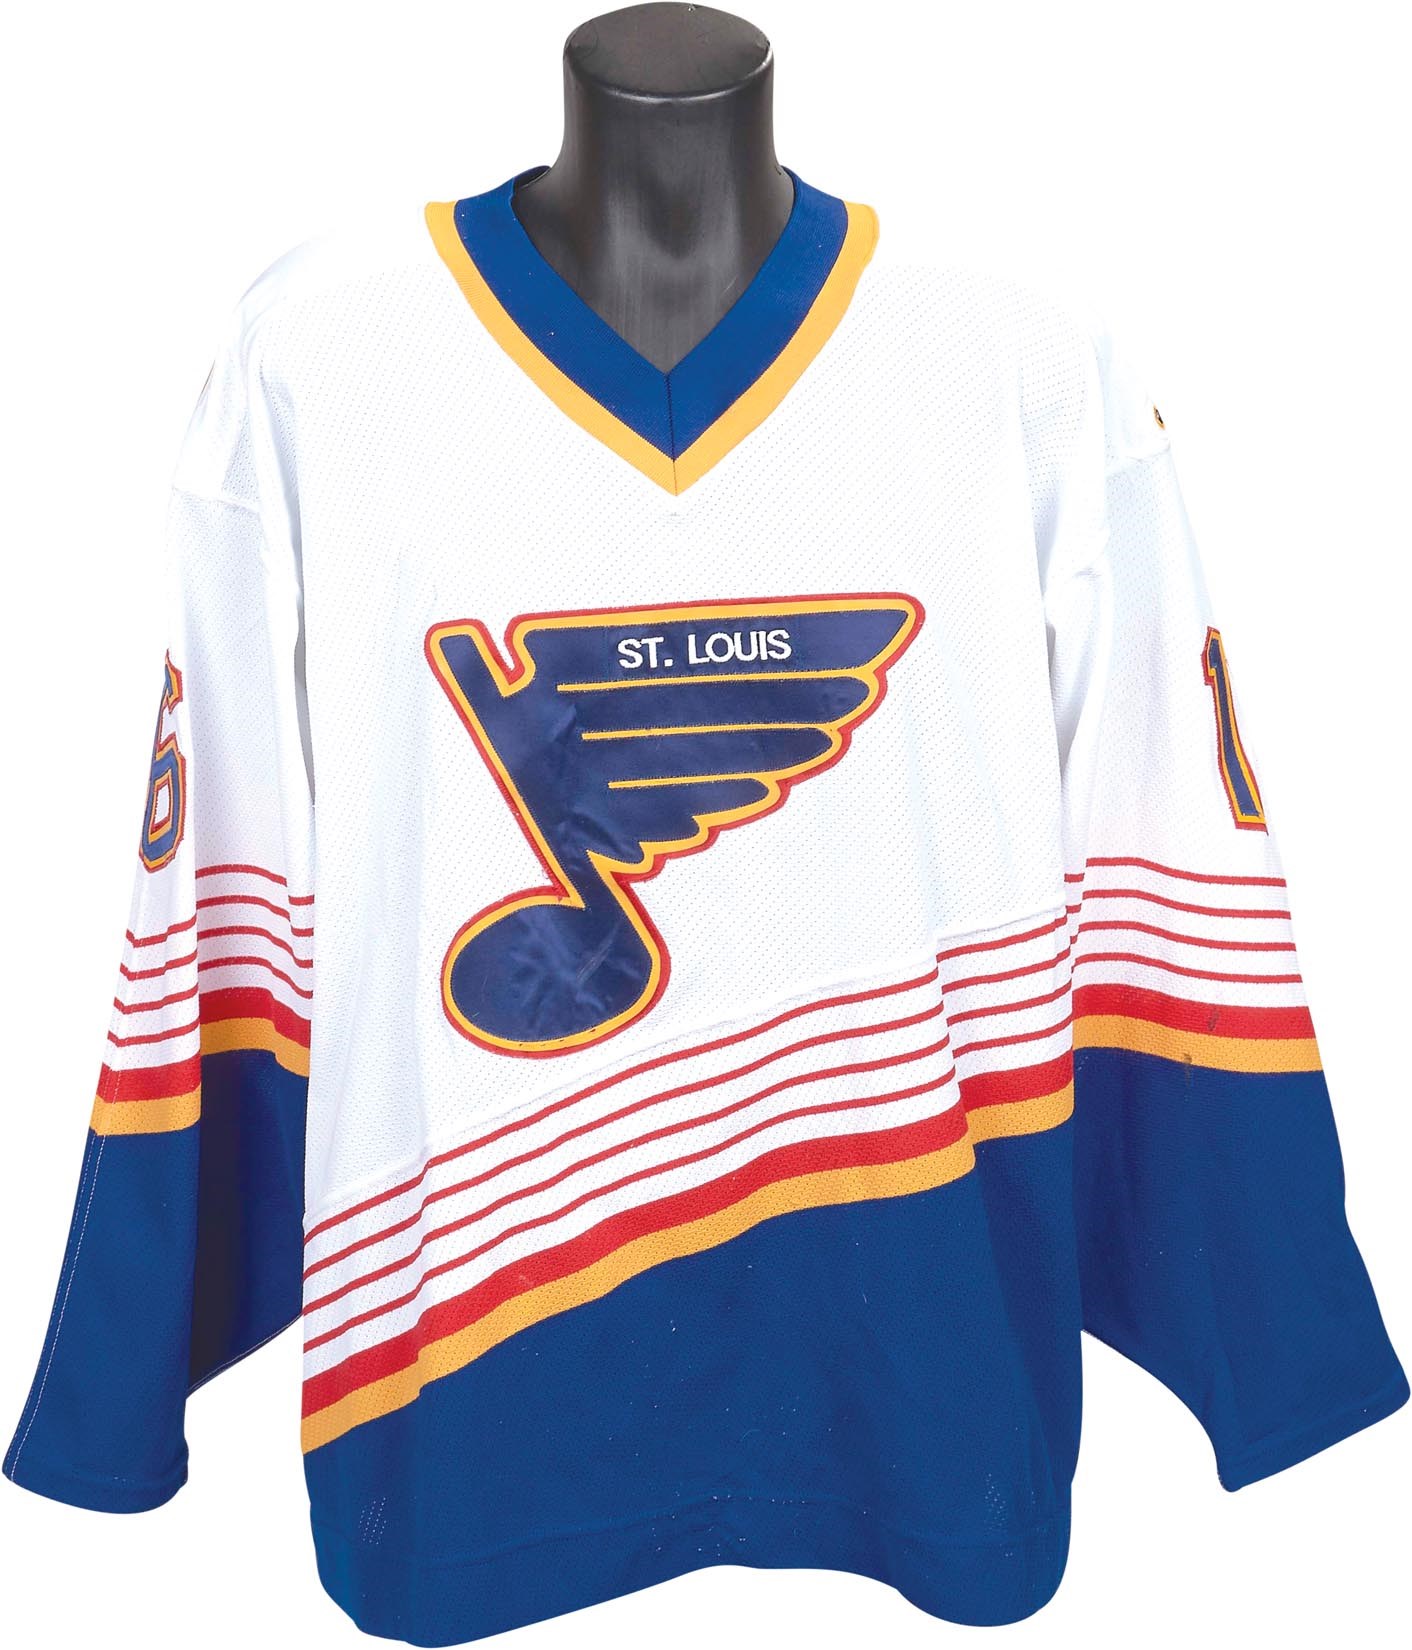 Hockey - 1995-96 Brett Hull St. Louis Blues Stanley Cup Play-Offs Game Worn Jersey